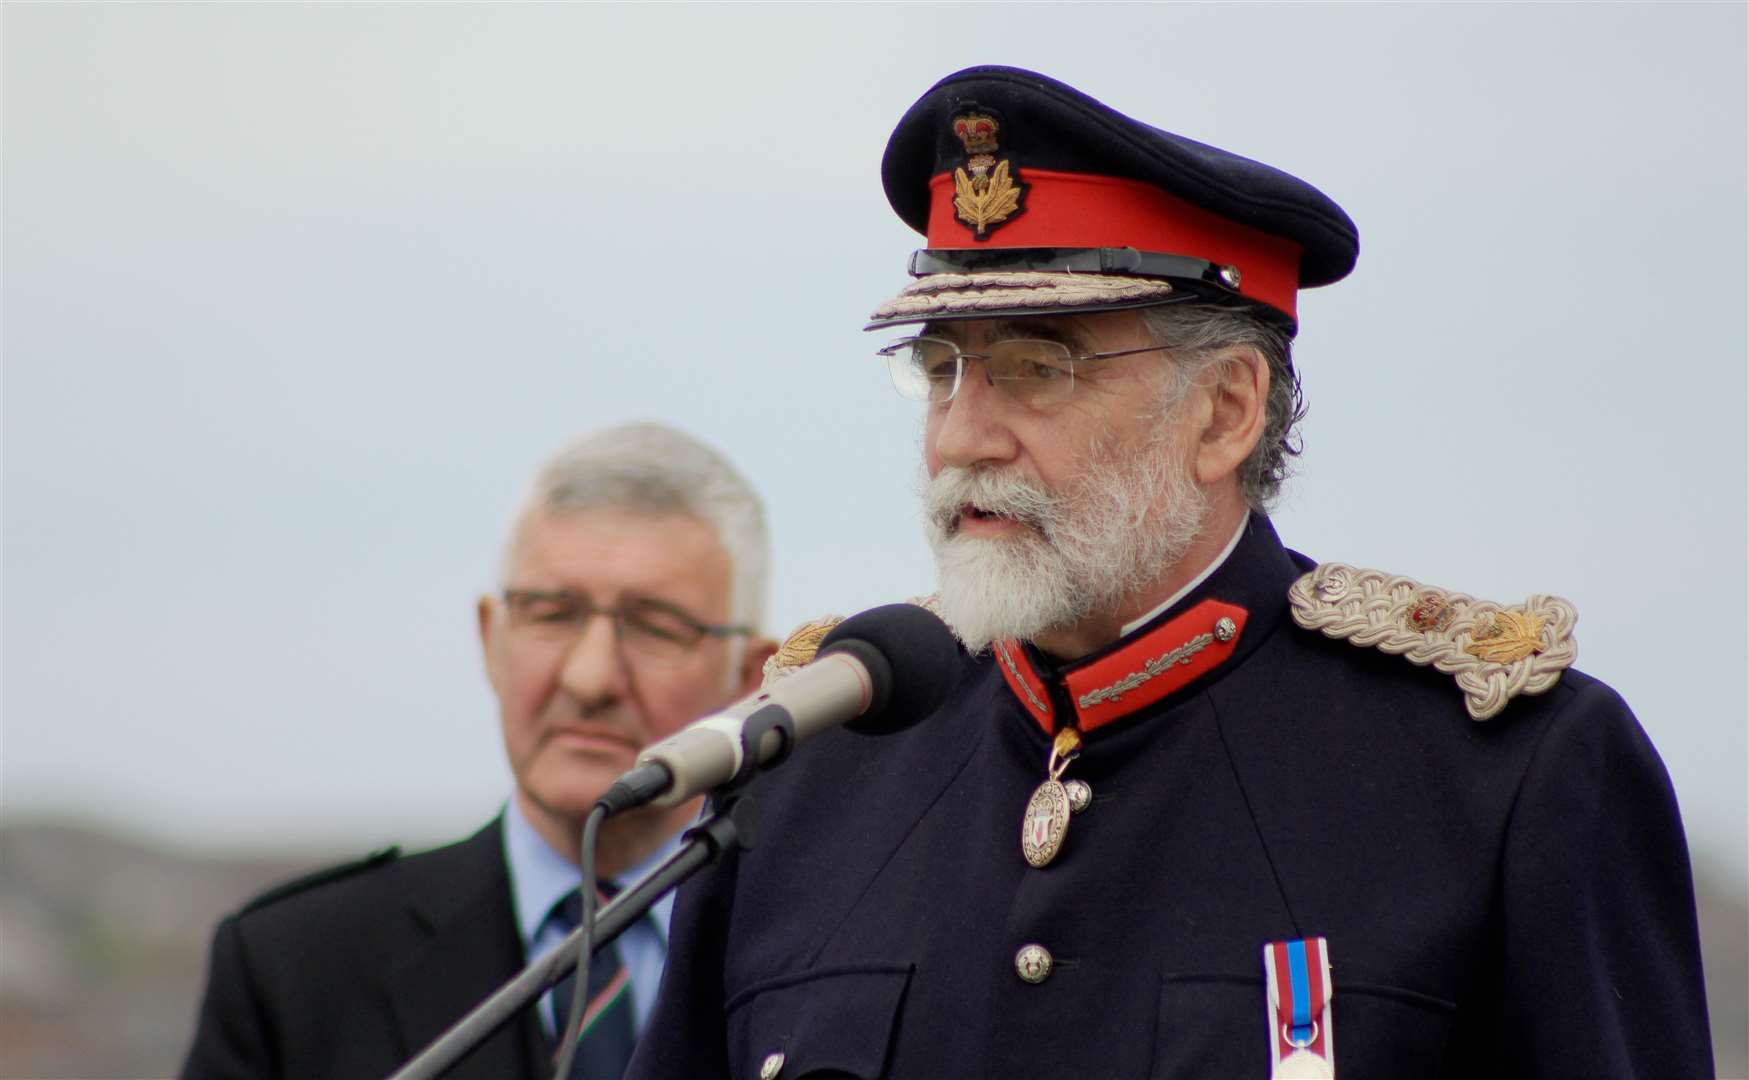 Lord Thurso, the Lord-Lieutenant of Caithness, speaking at Saturday's event in Wick, with Willie Watt behind. Picture: Alan Hendry